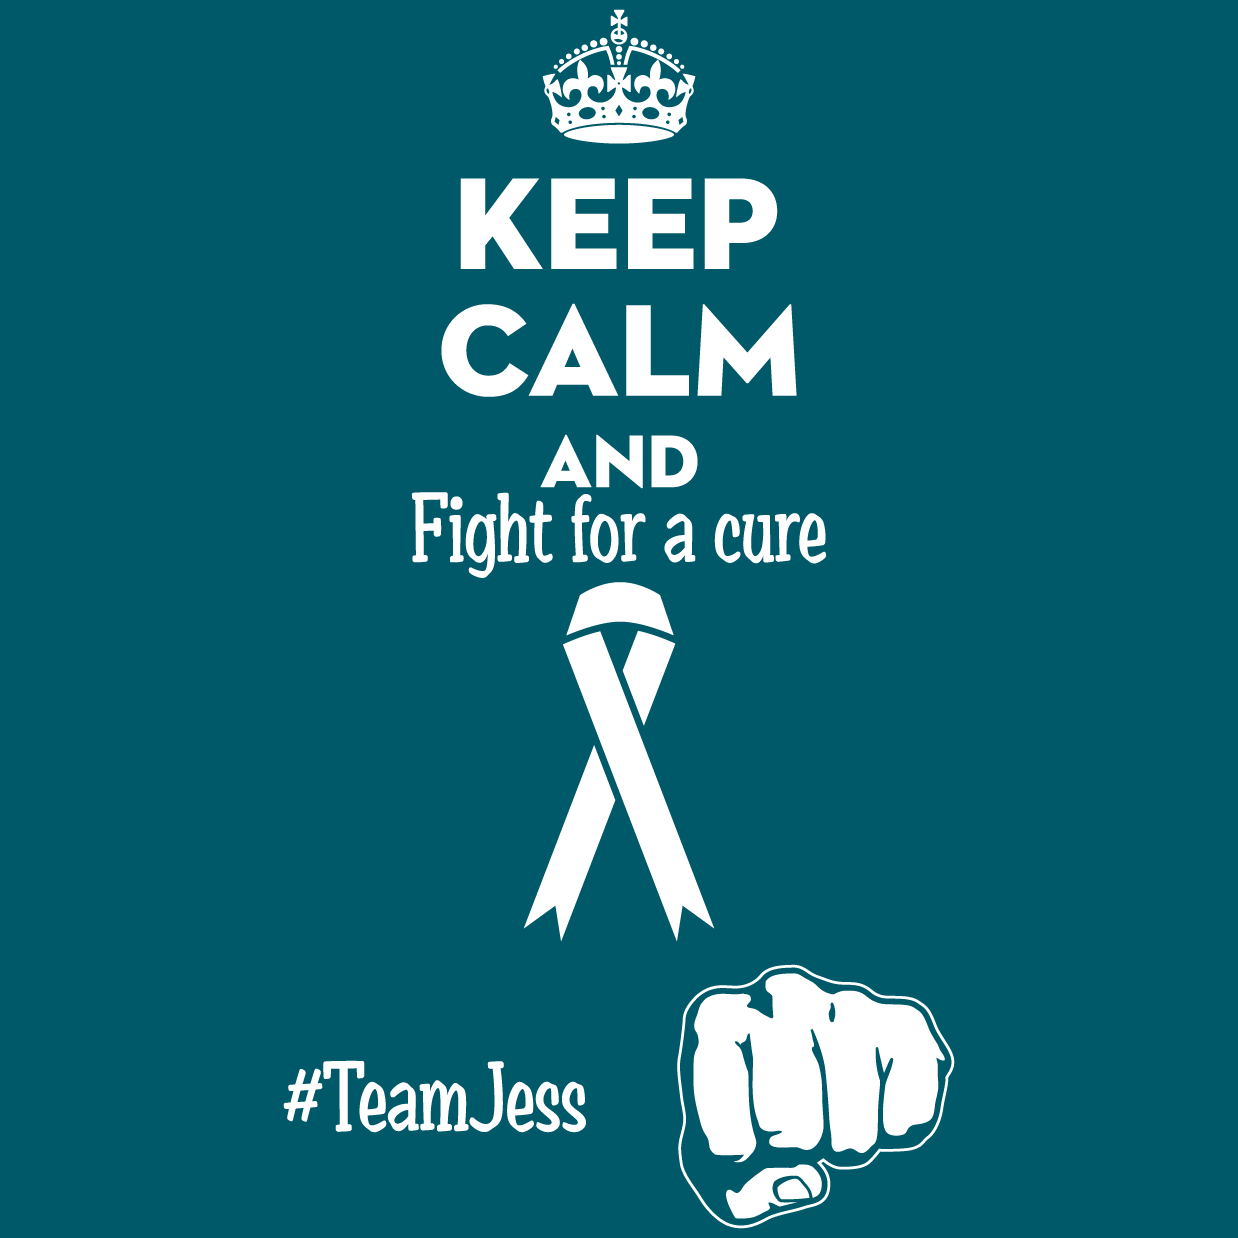 Jess Help for fighting cancer shirt design - zoomed